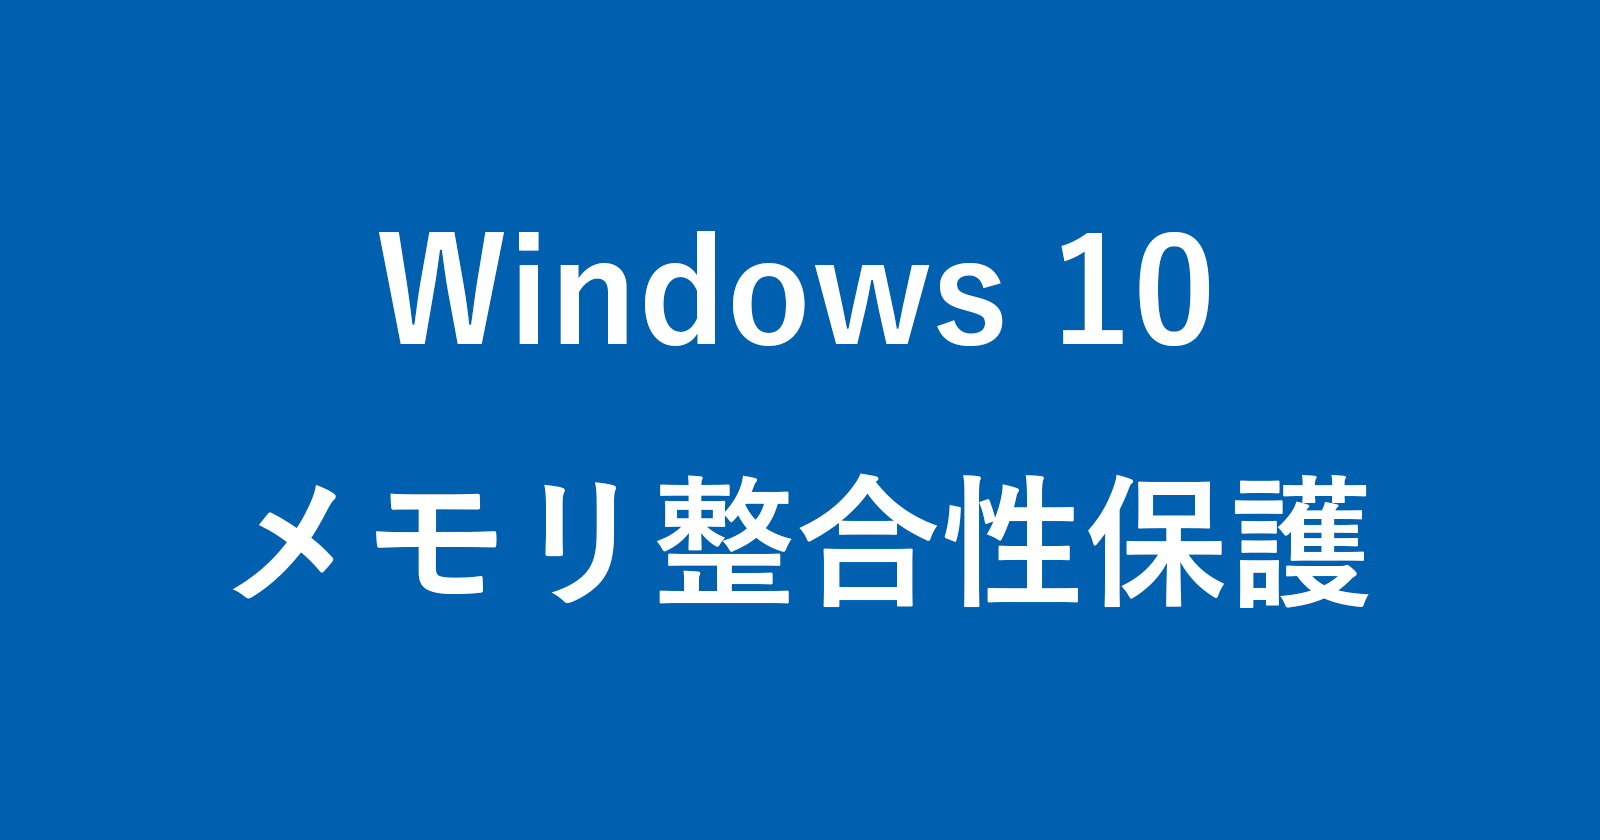 windows 10 memory integrity protection